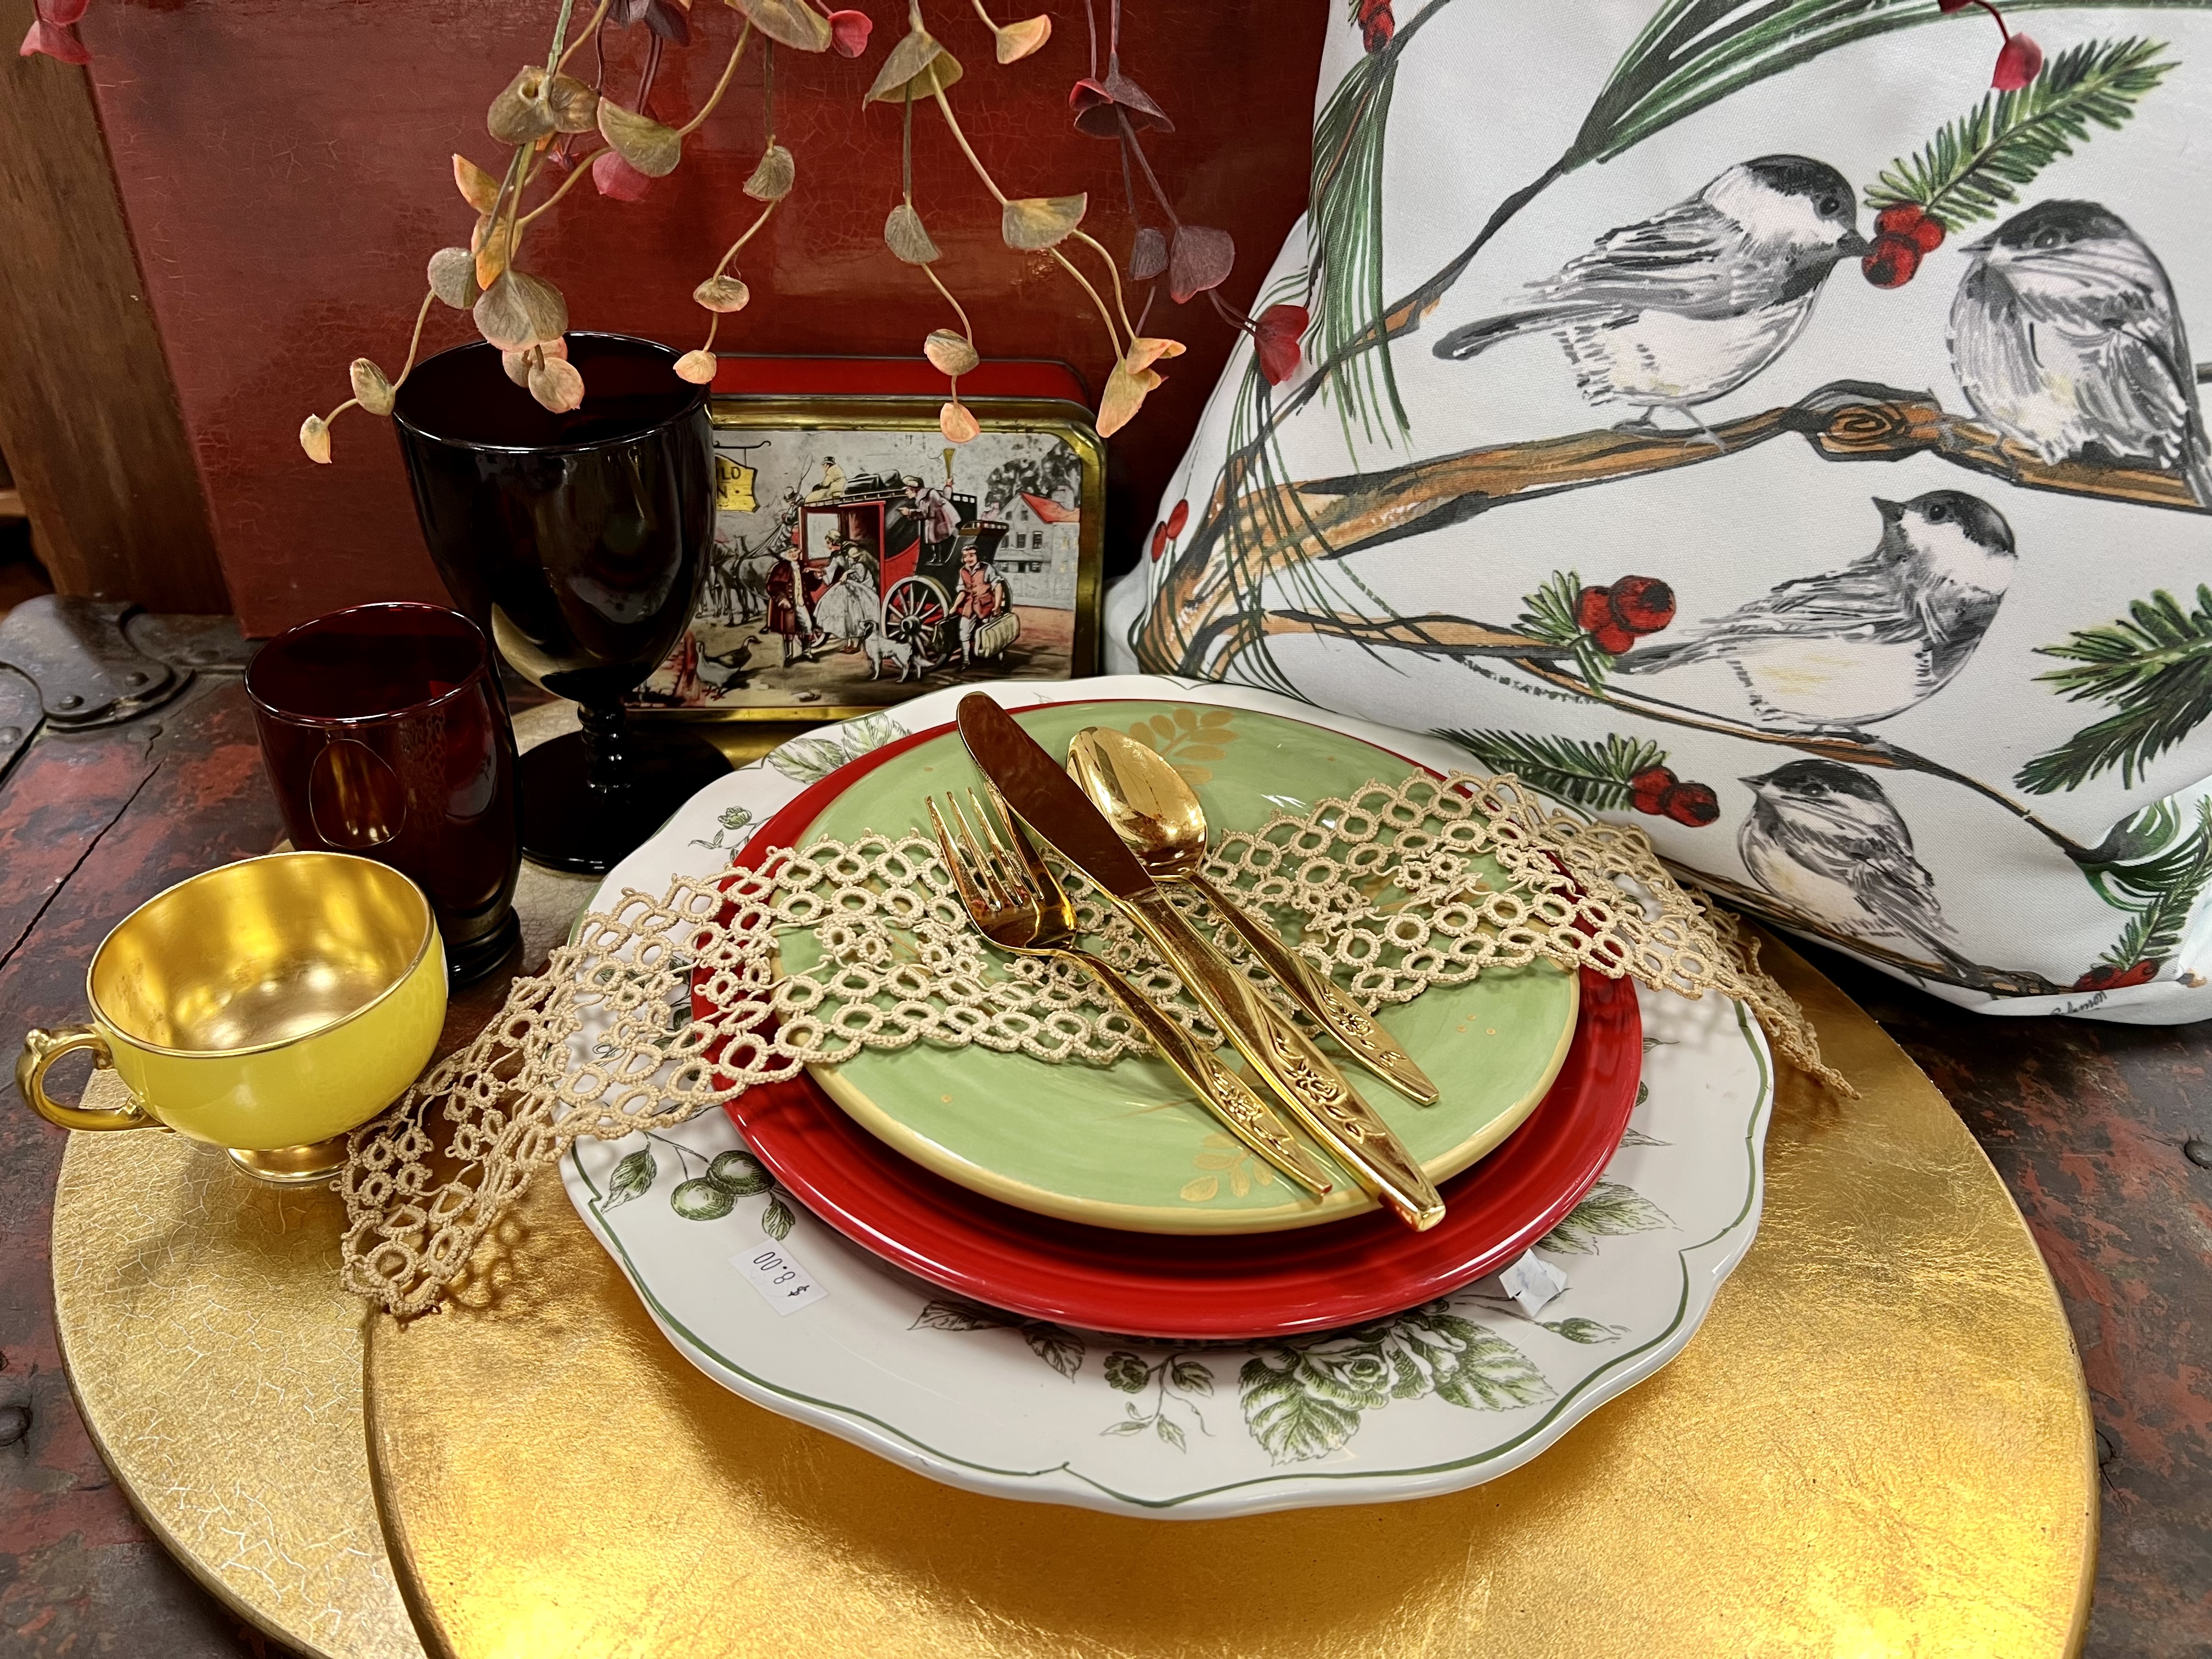 Holiday place setting with mix and match vintage tableware